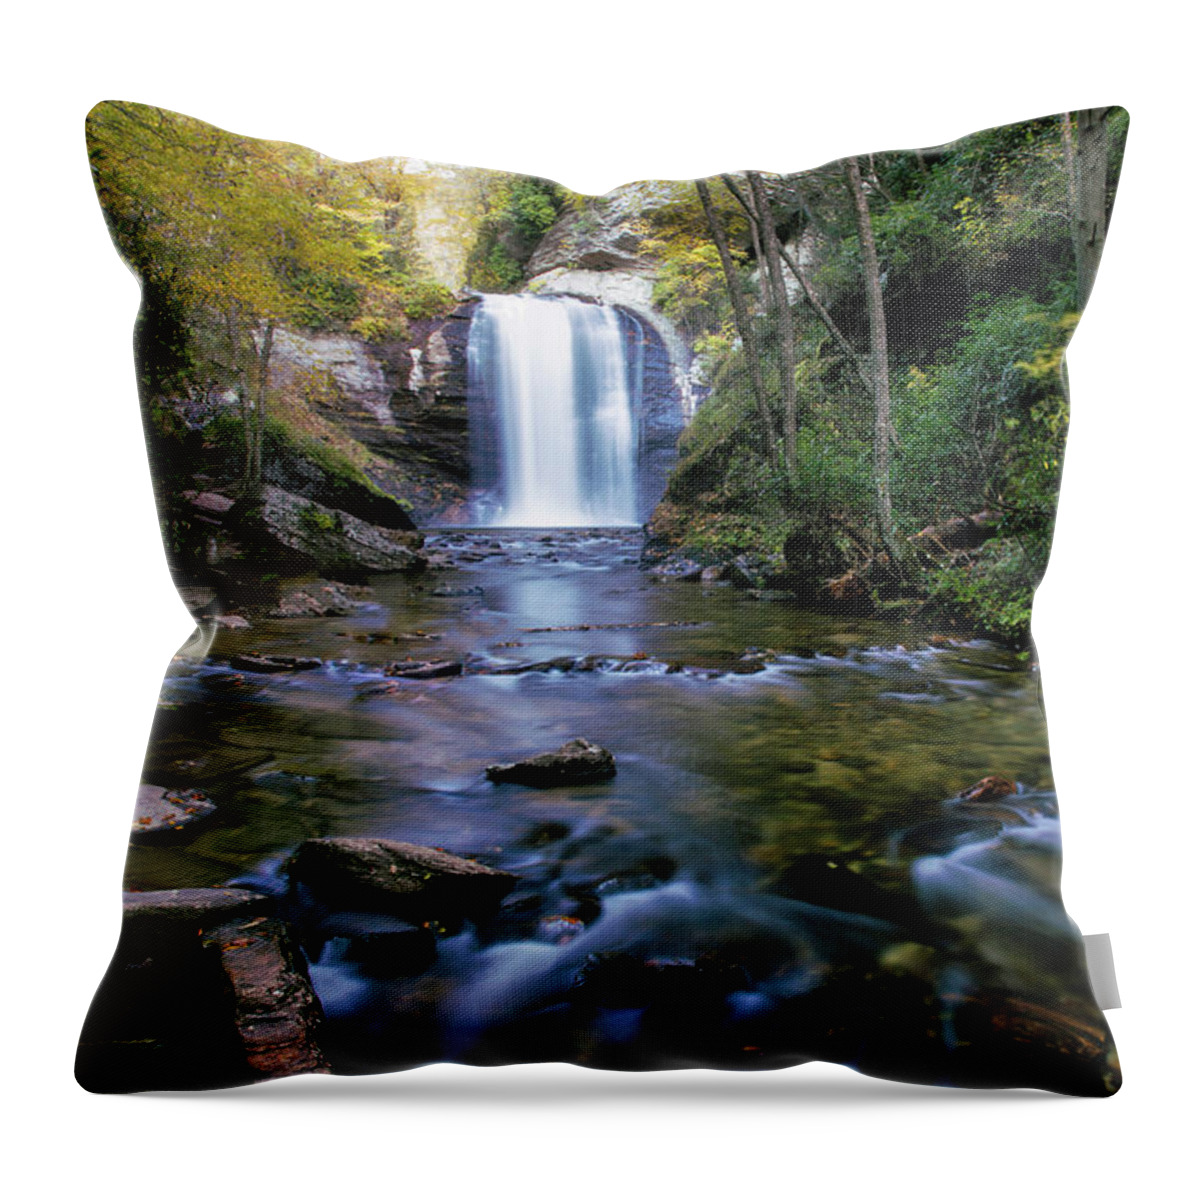 Art Prints Throw Pillow featuring the photograph Looking Glass Falls by Nunweiler Photography